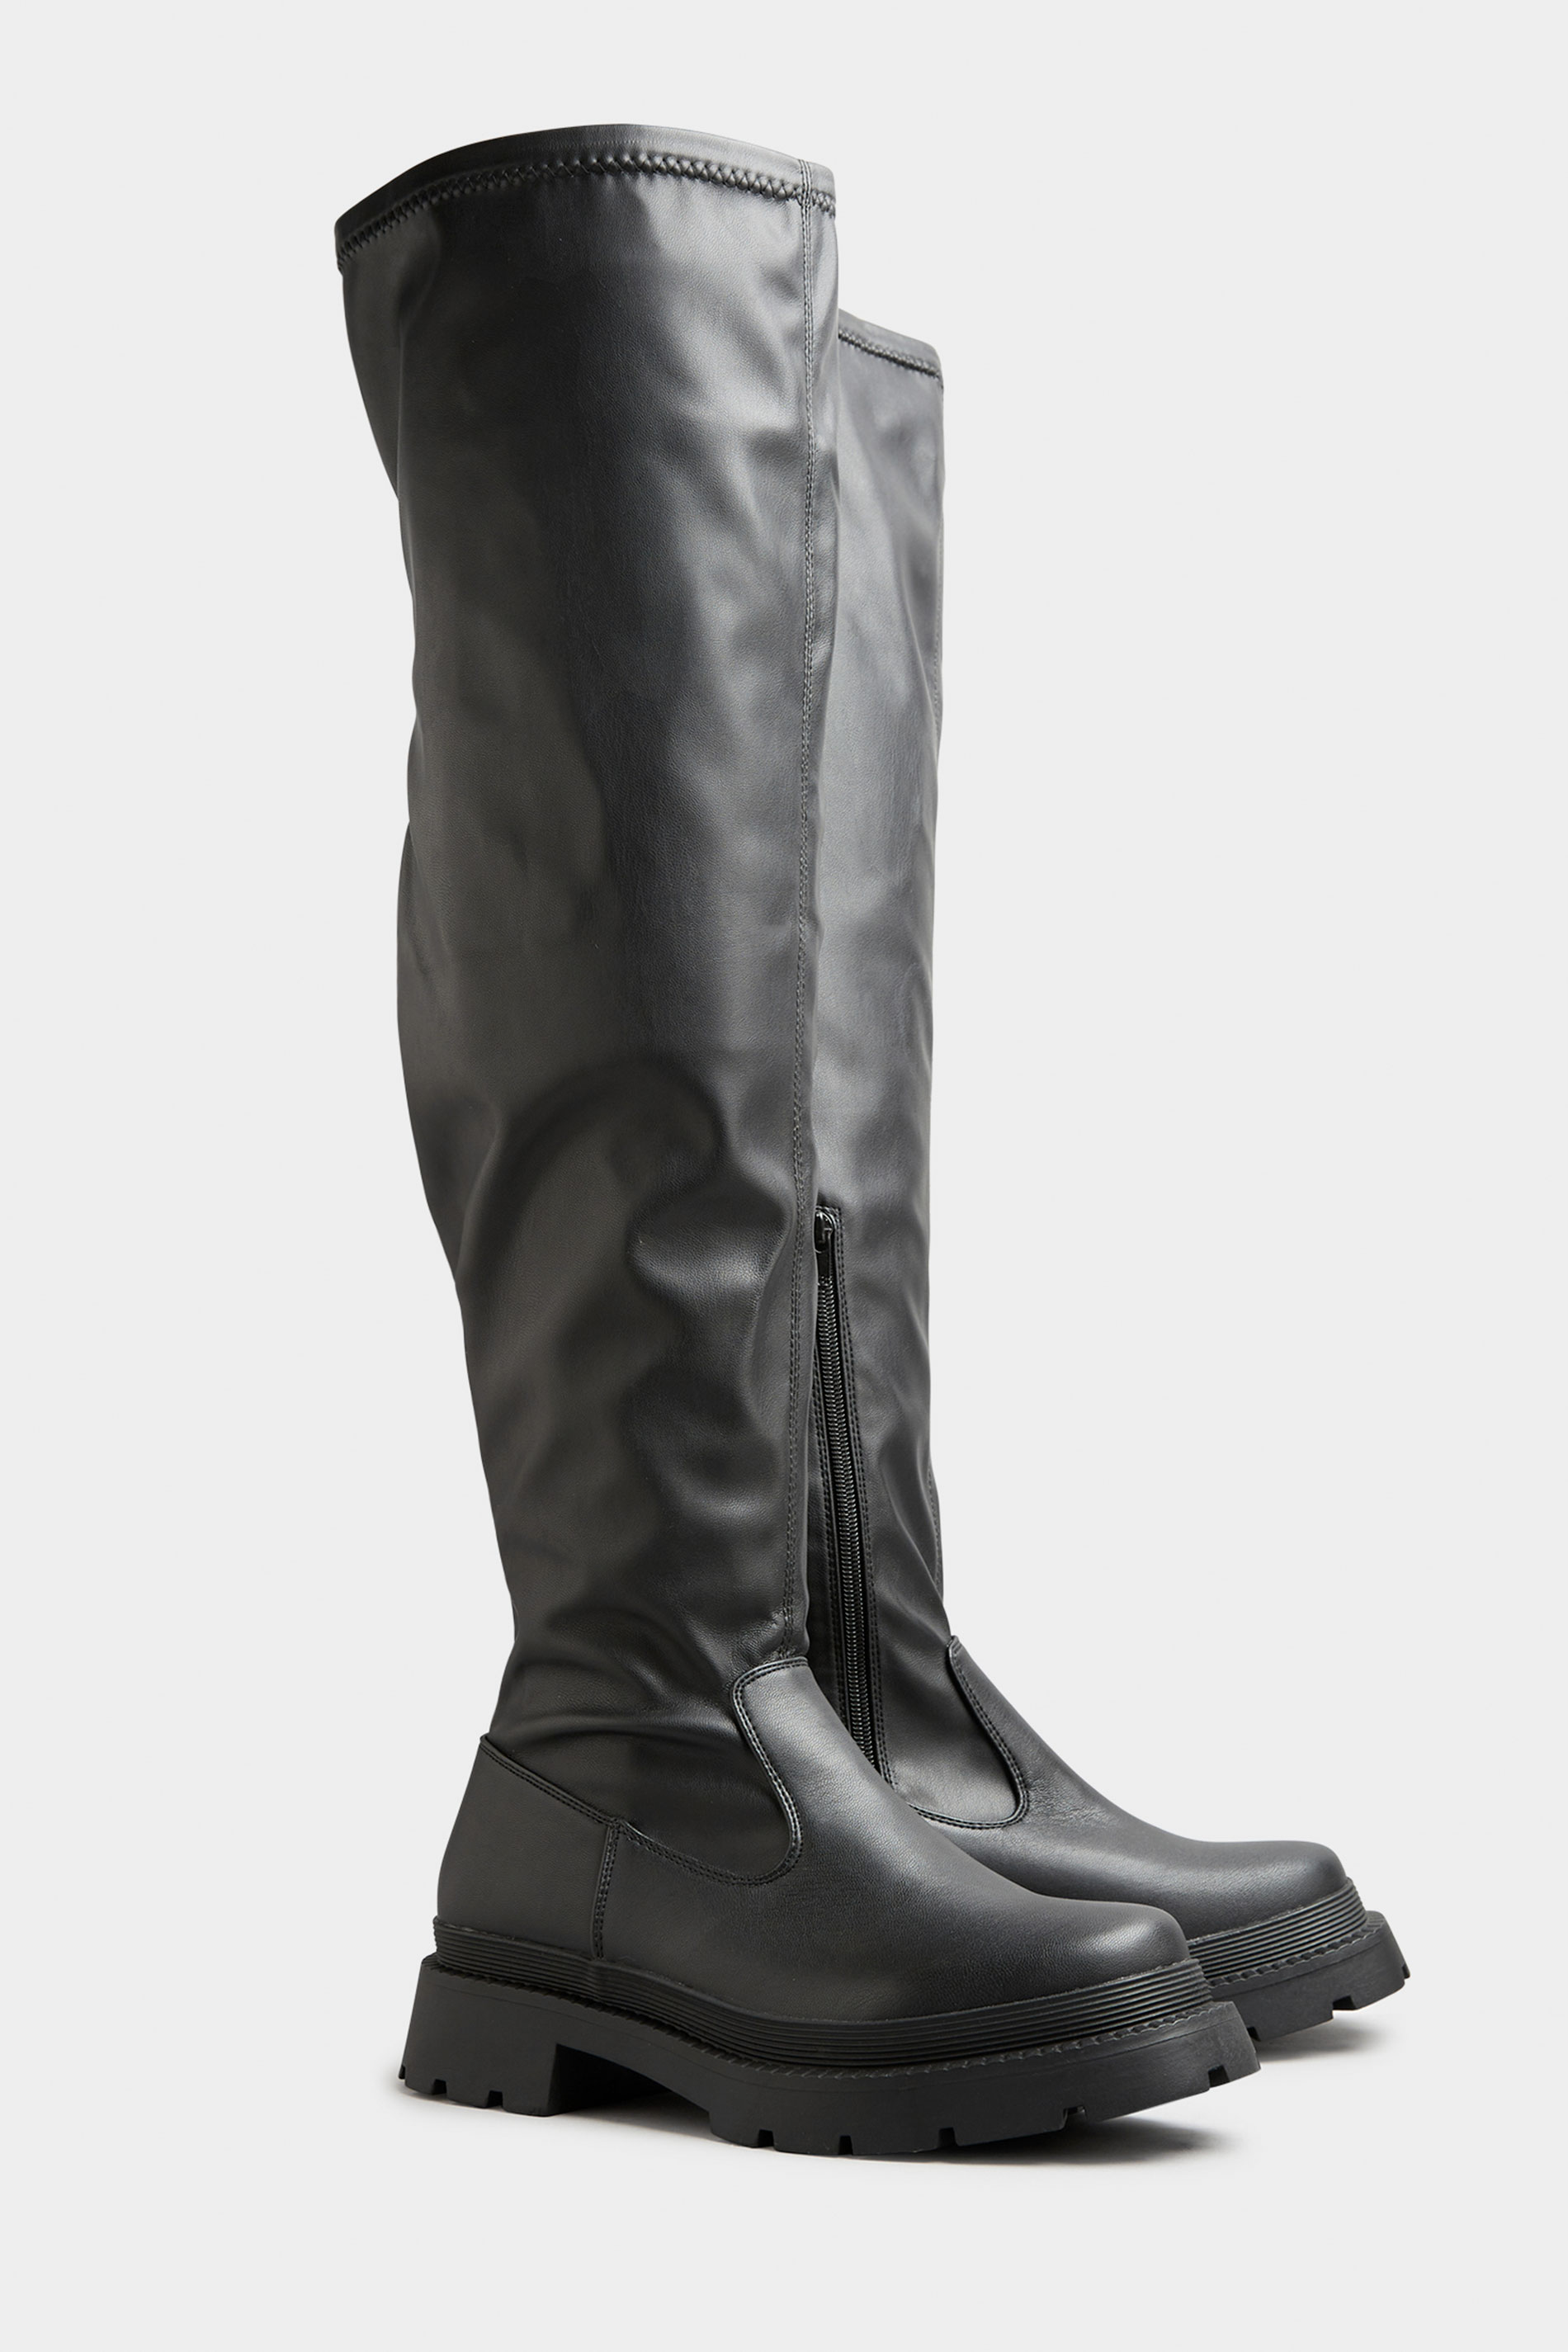 LIMITED COLLECTION Black Over The Knee Cleated Boots In Extra Wide Fit_B.jpg